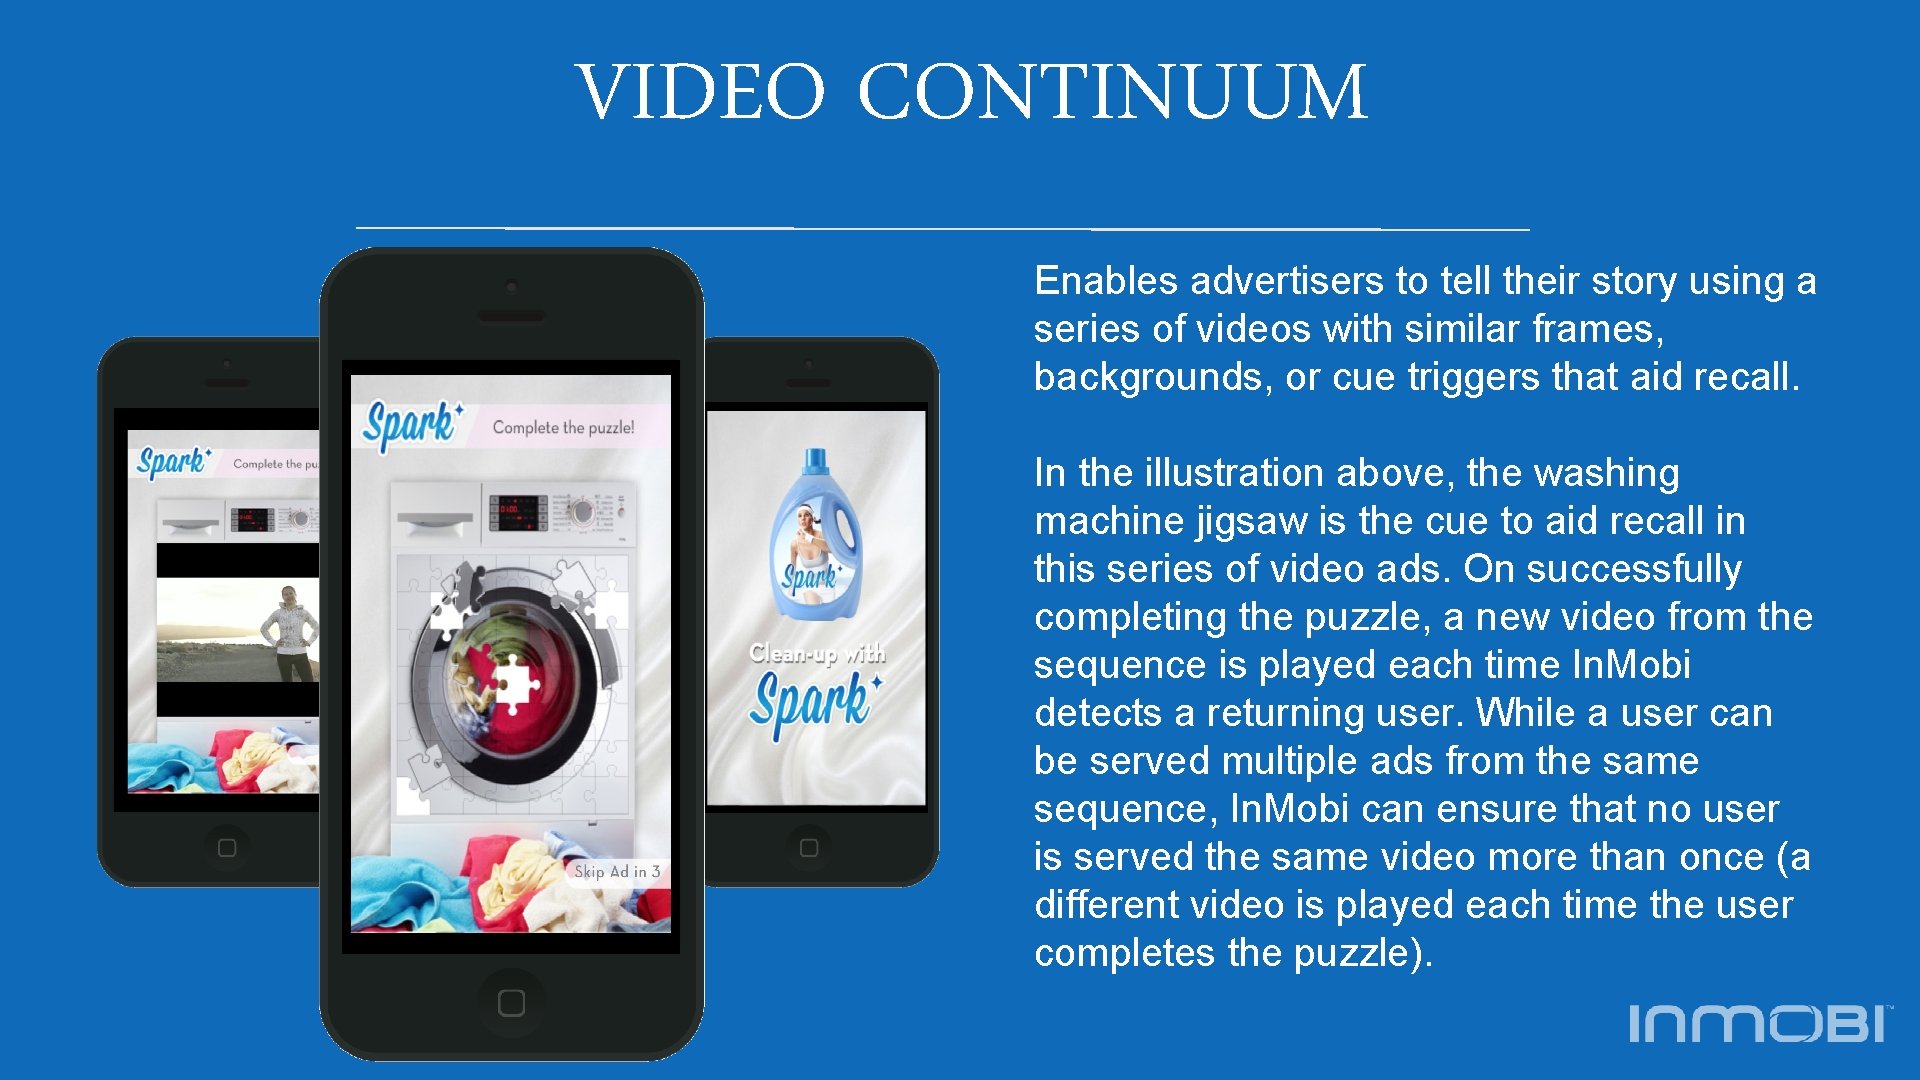 VIDEO CONTINUUM Enables advertisers to tell their story using a series of videos with